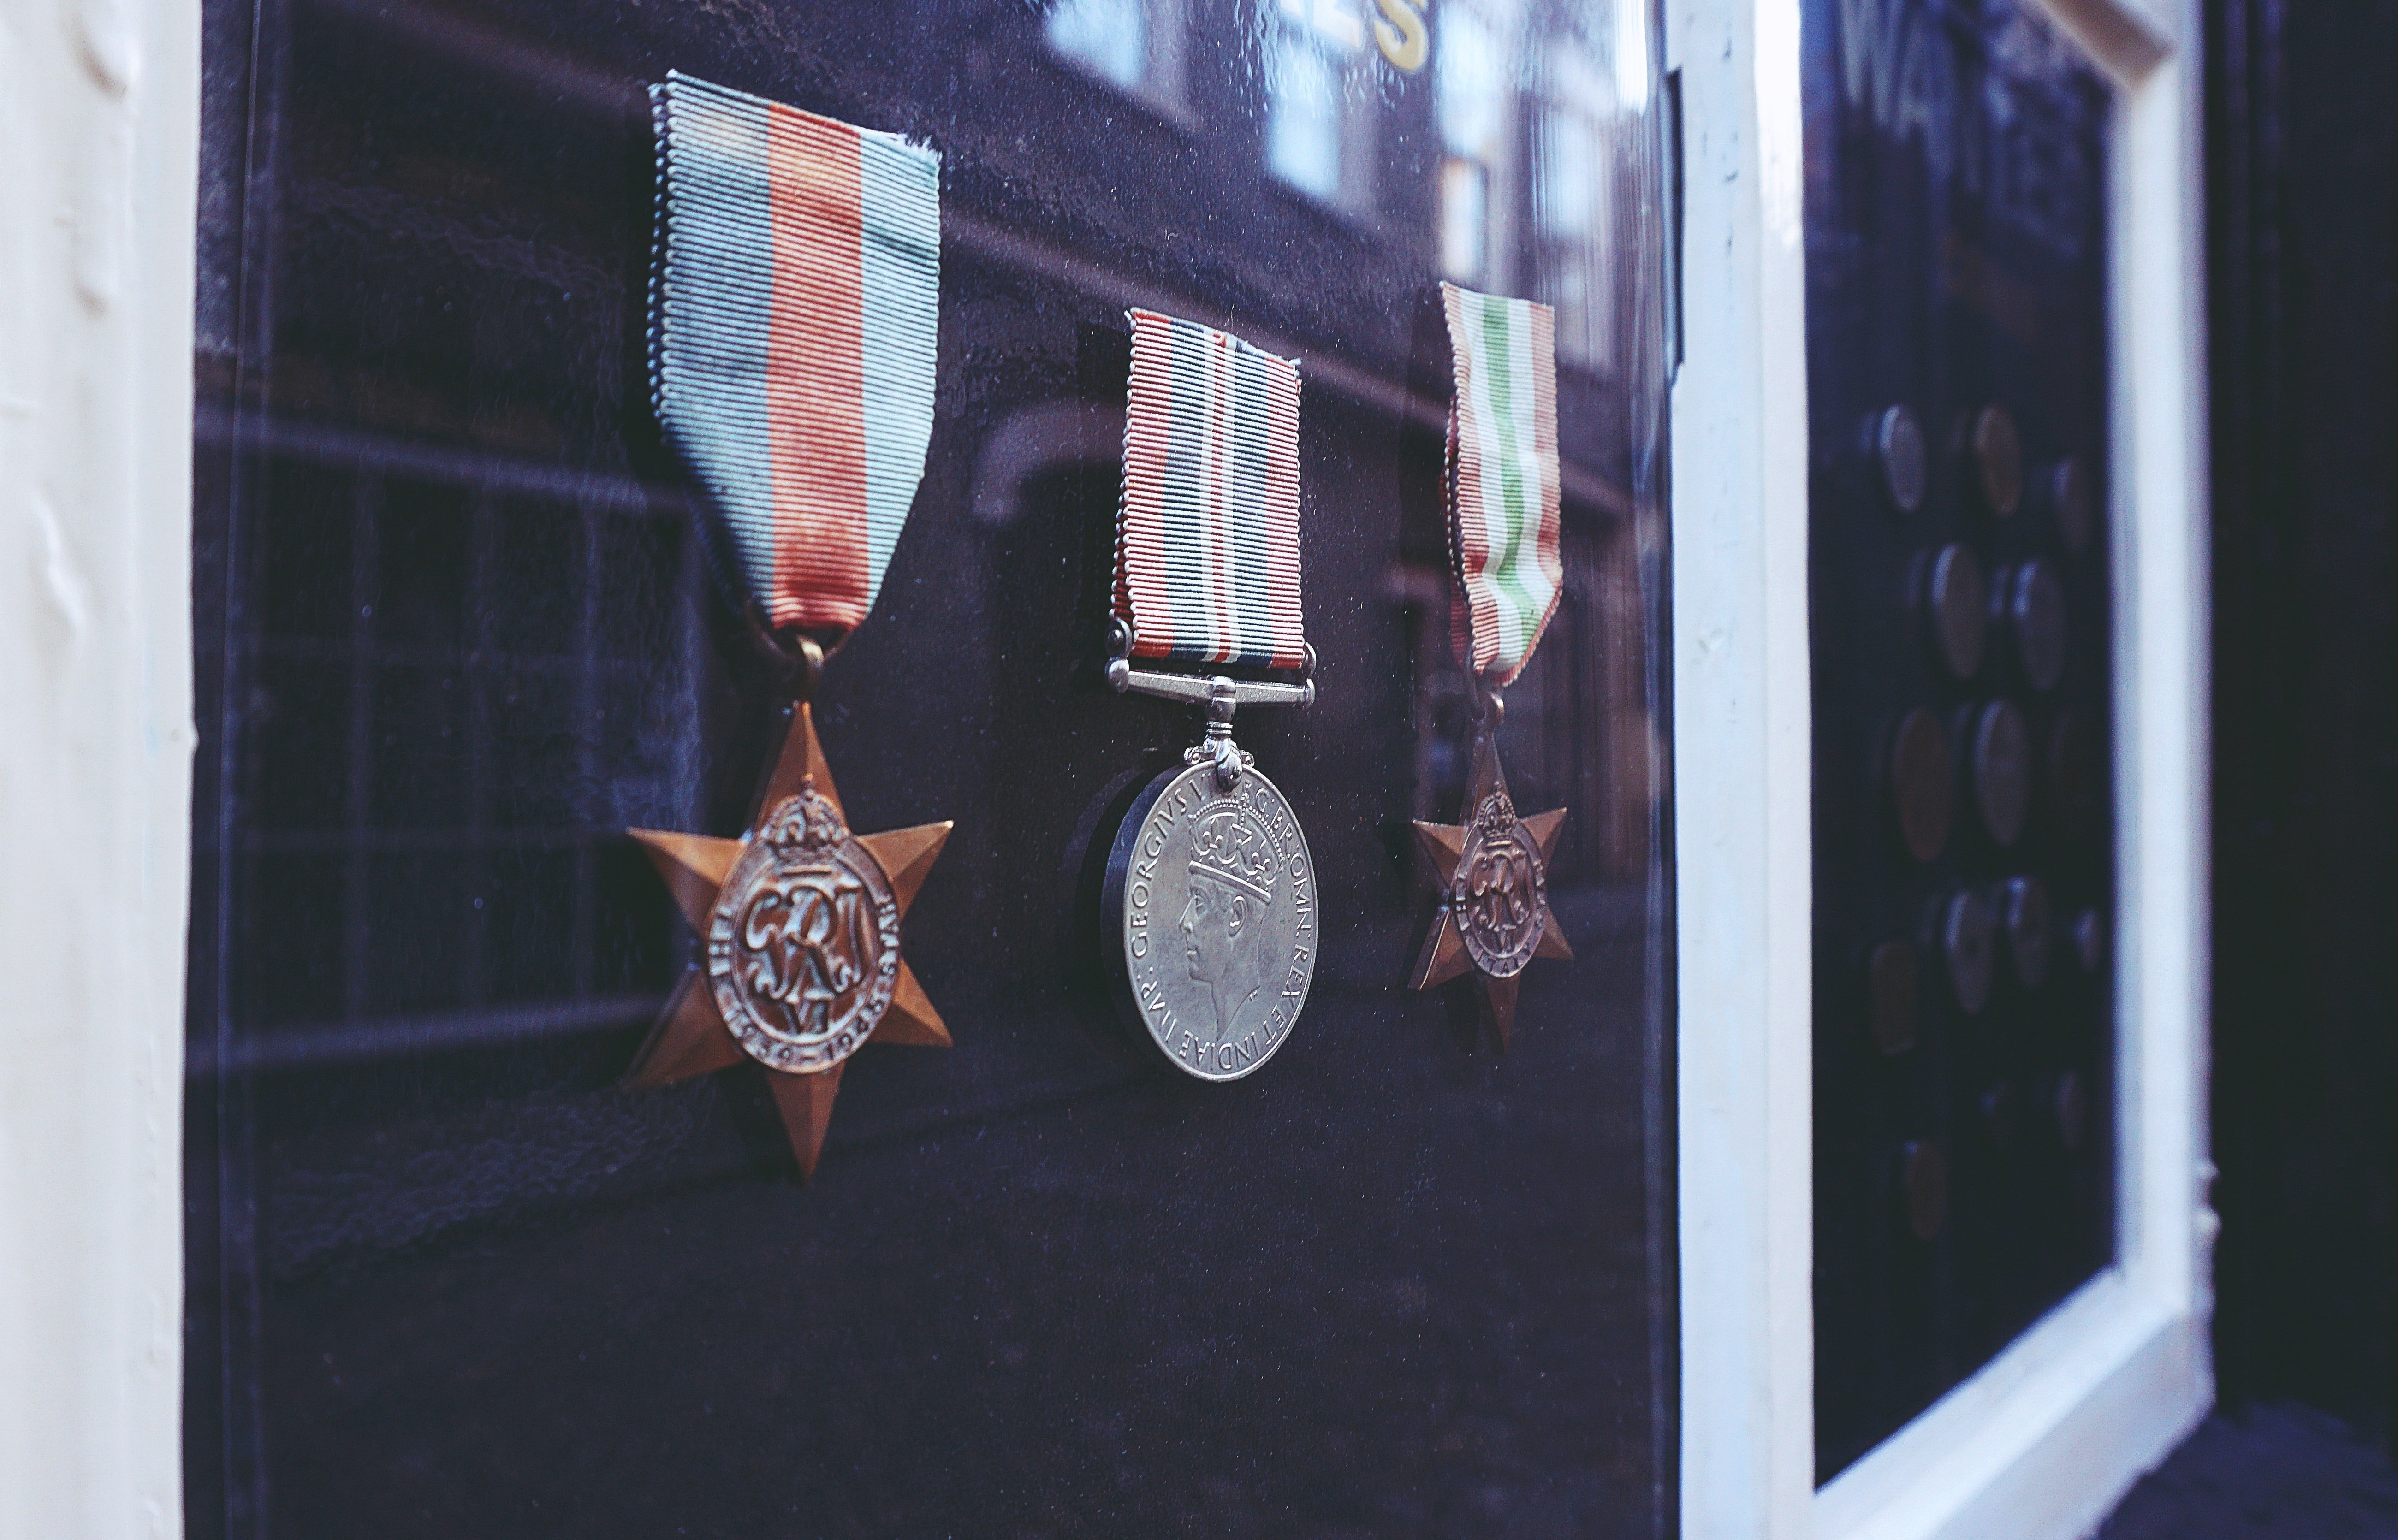 Agnes bought a glass case for Jim's medals  | Photo: Pexels